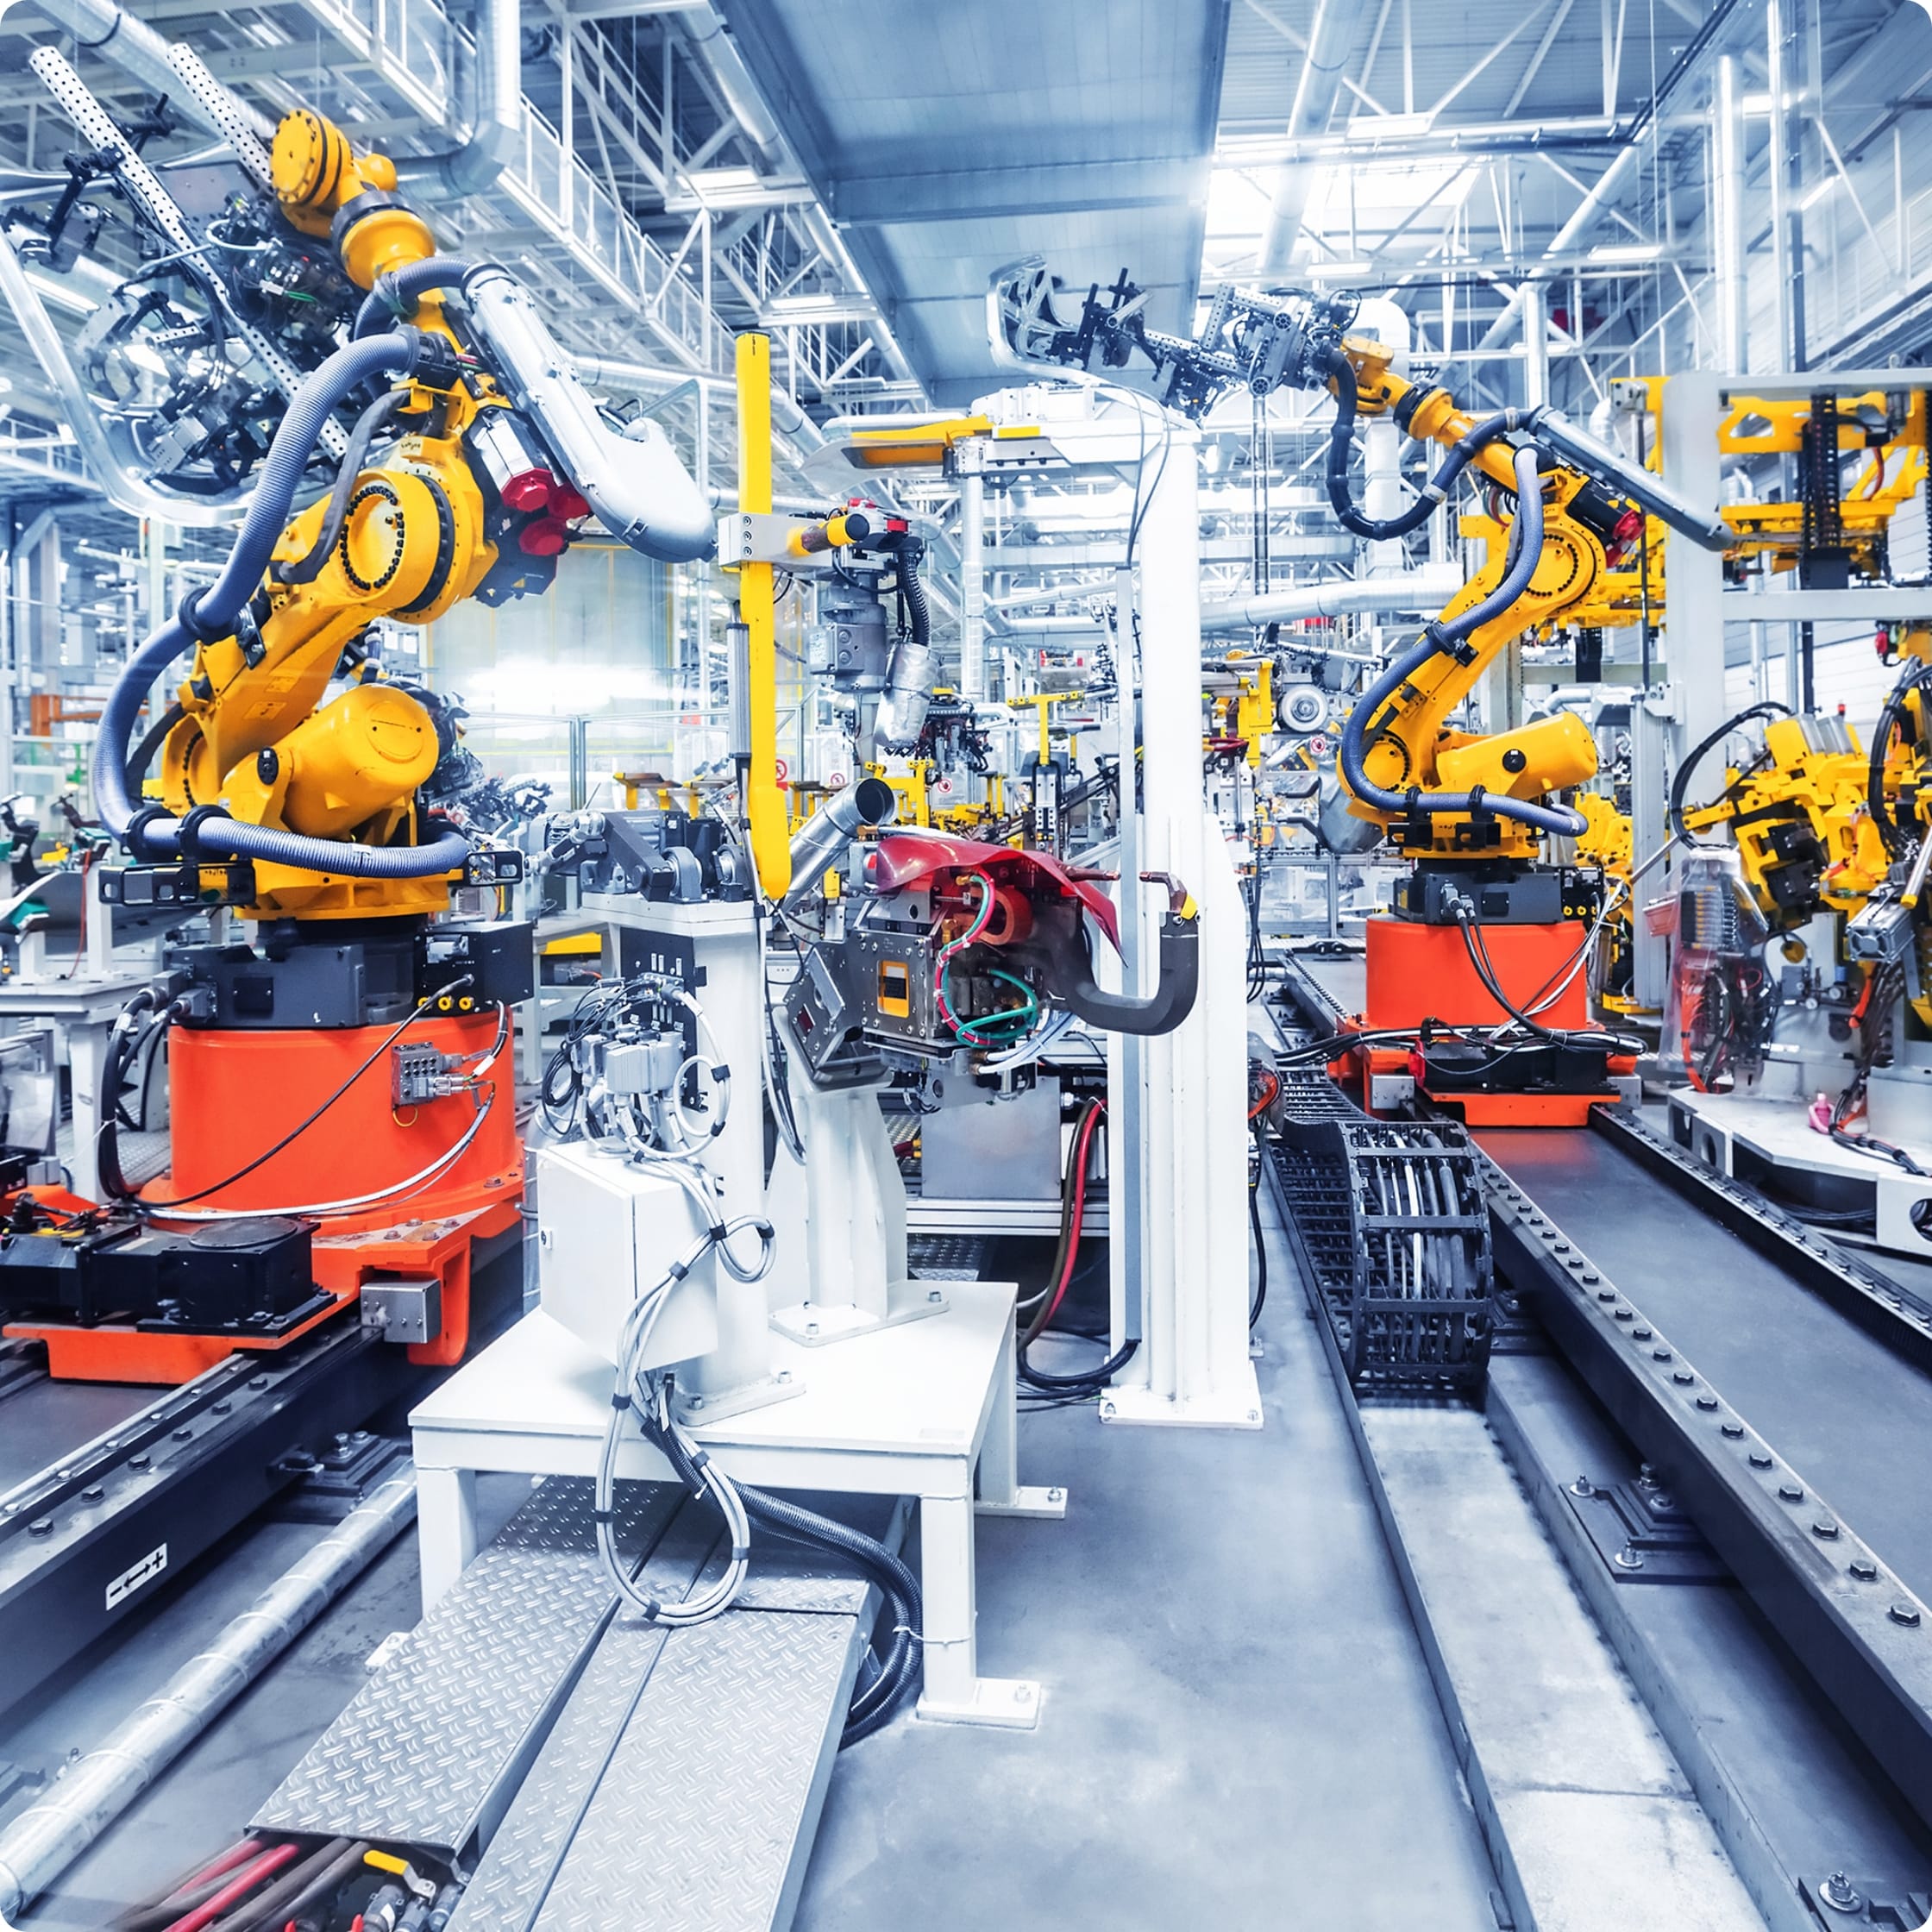 Automated robots in a manufacturing plant